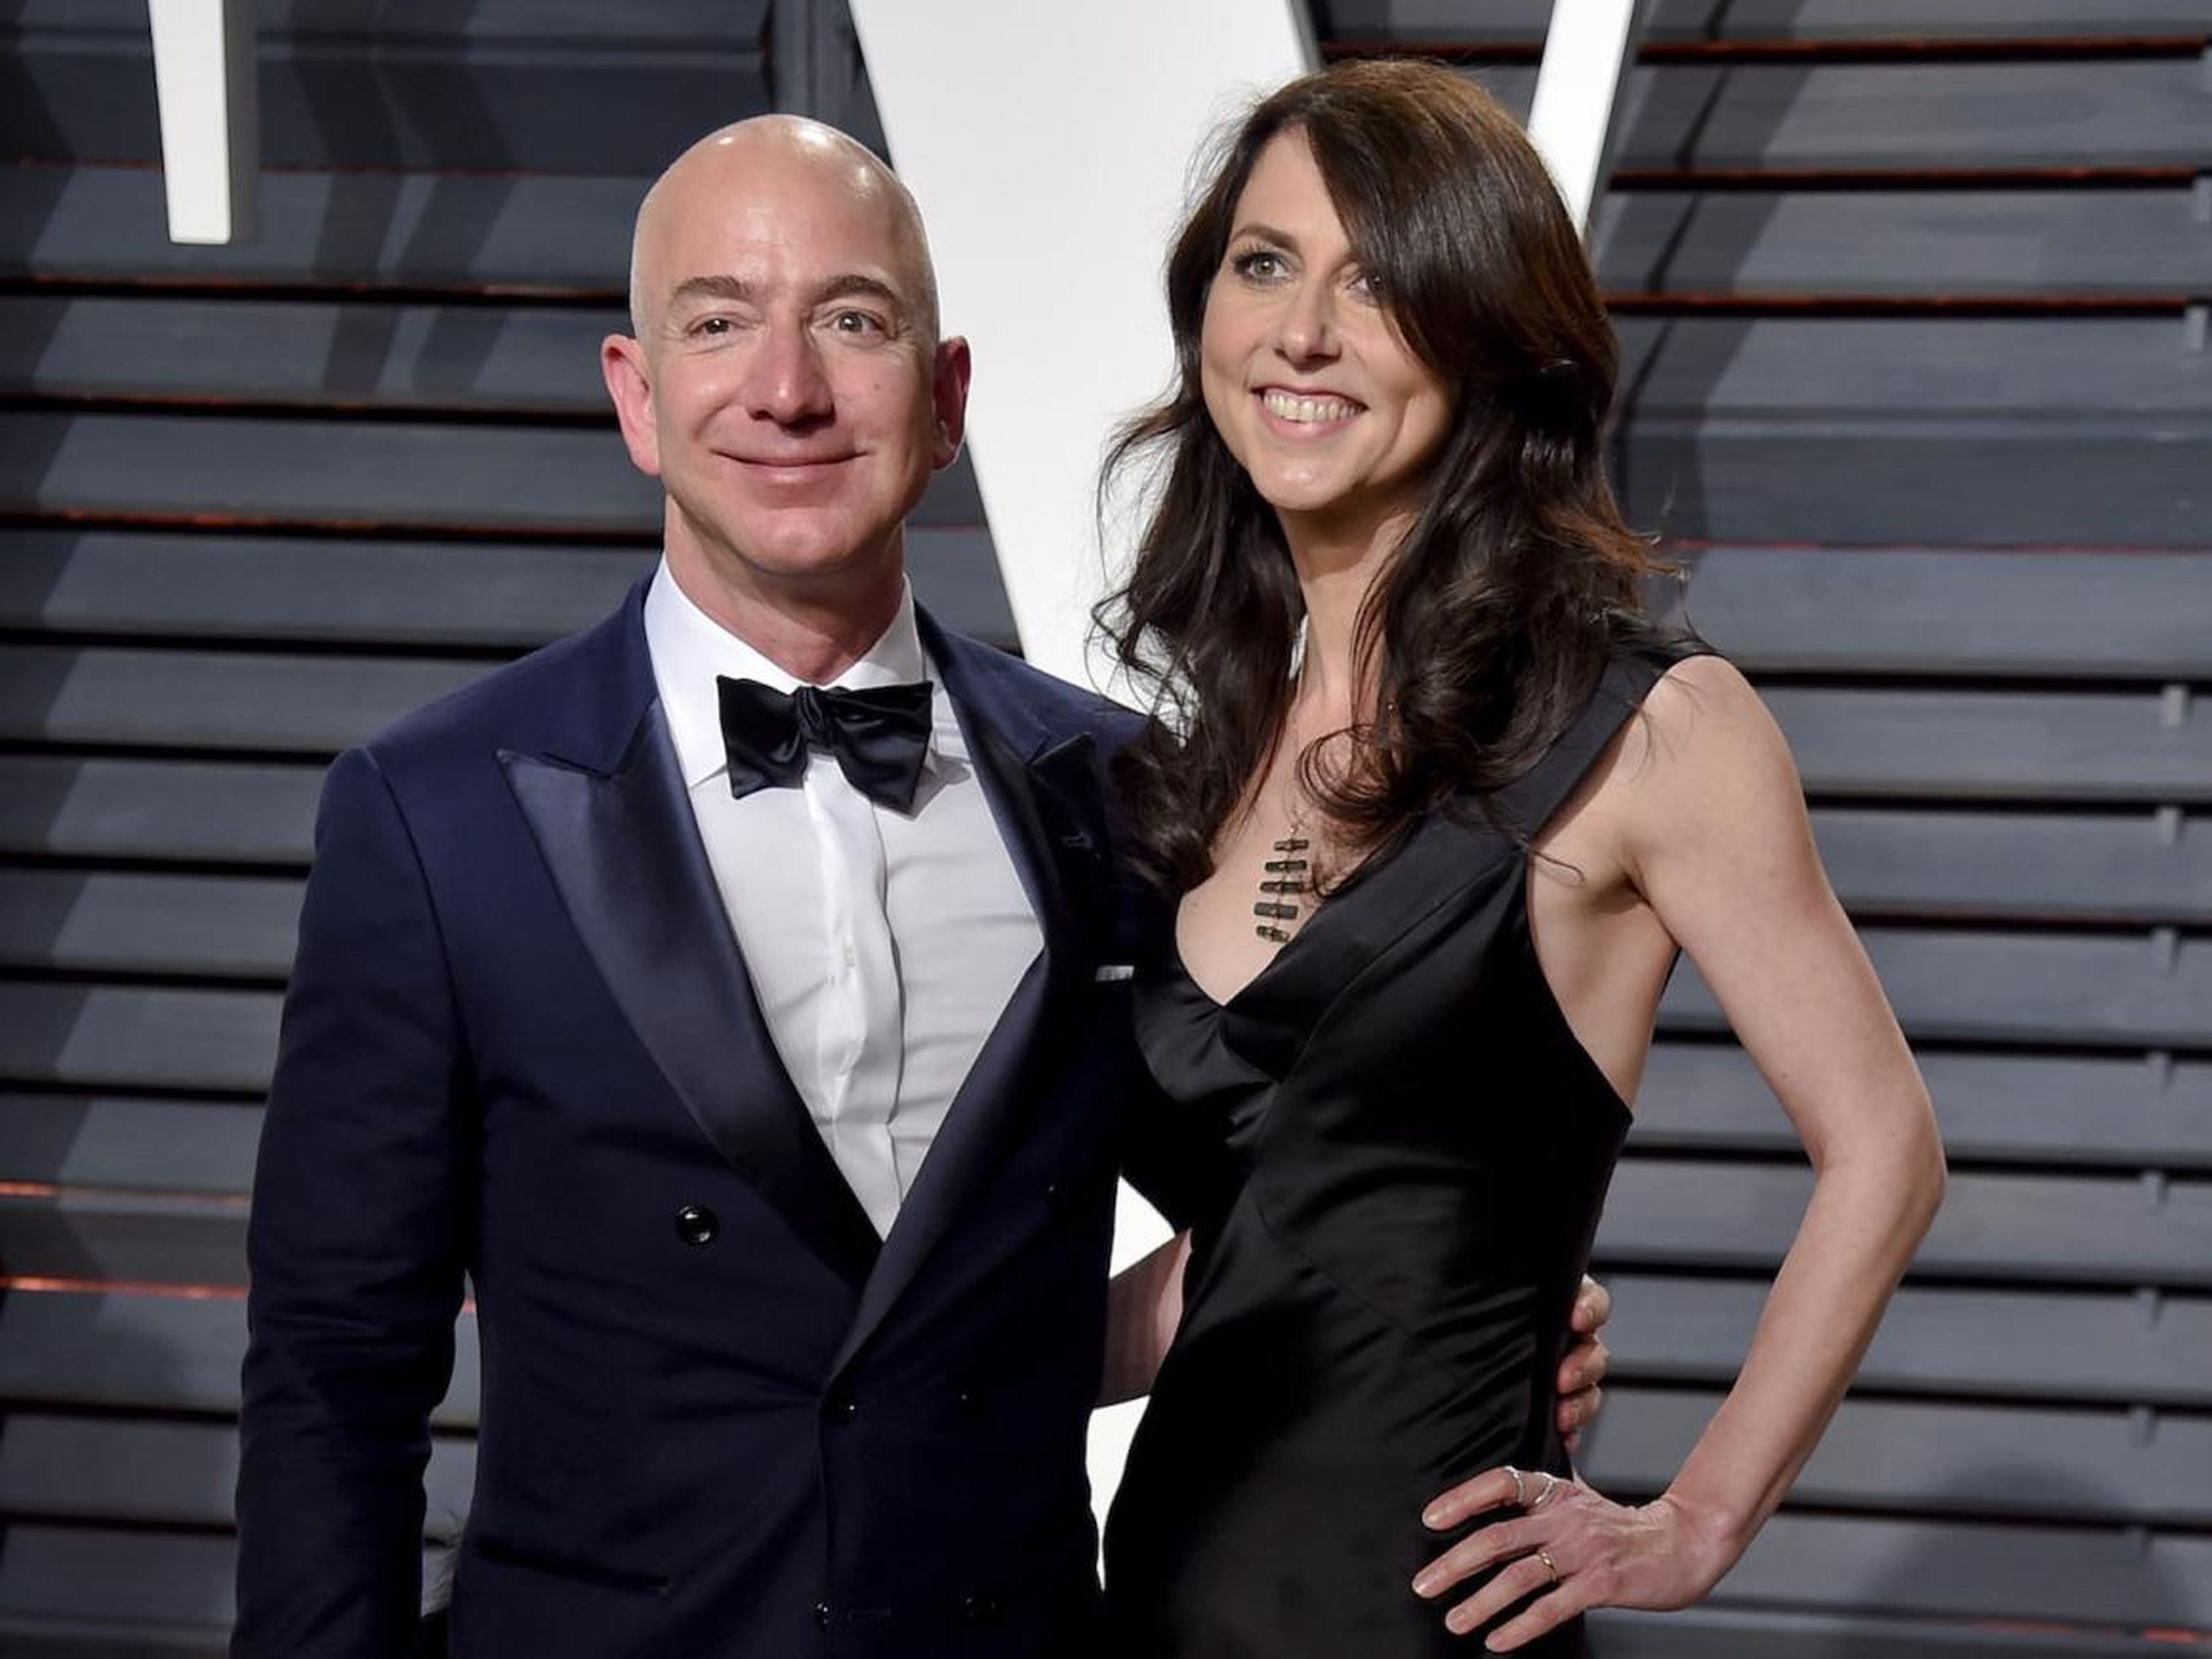 Jeff and MacKenzie Bezos met at work — he was the first person to interview her at the firm.